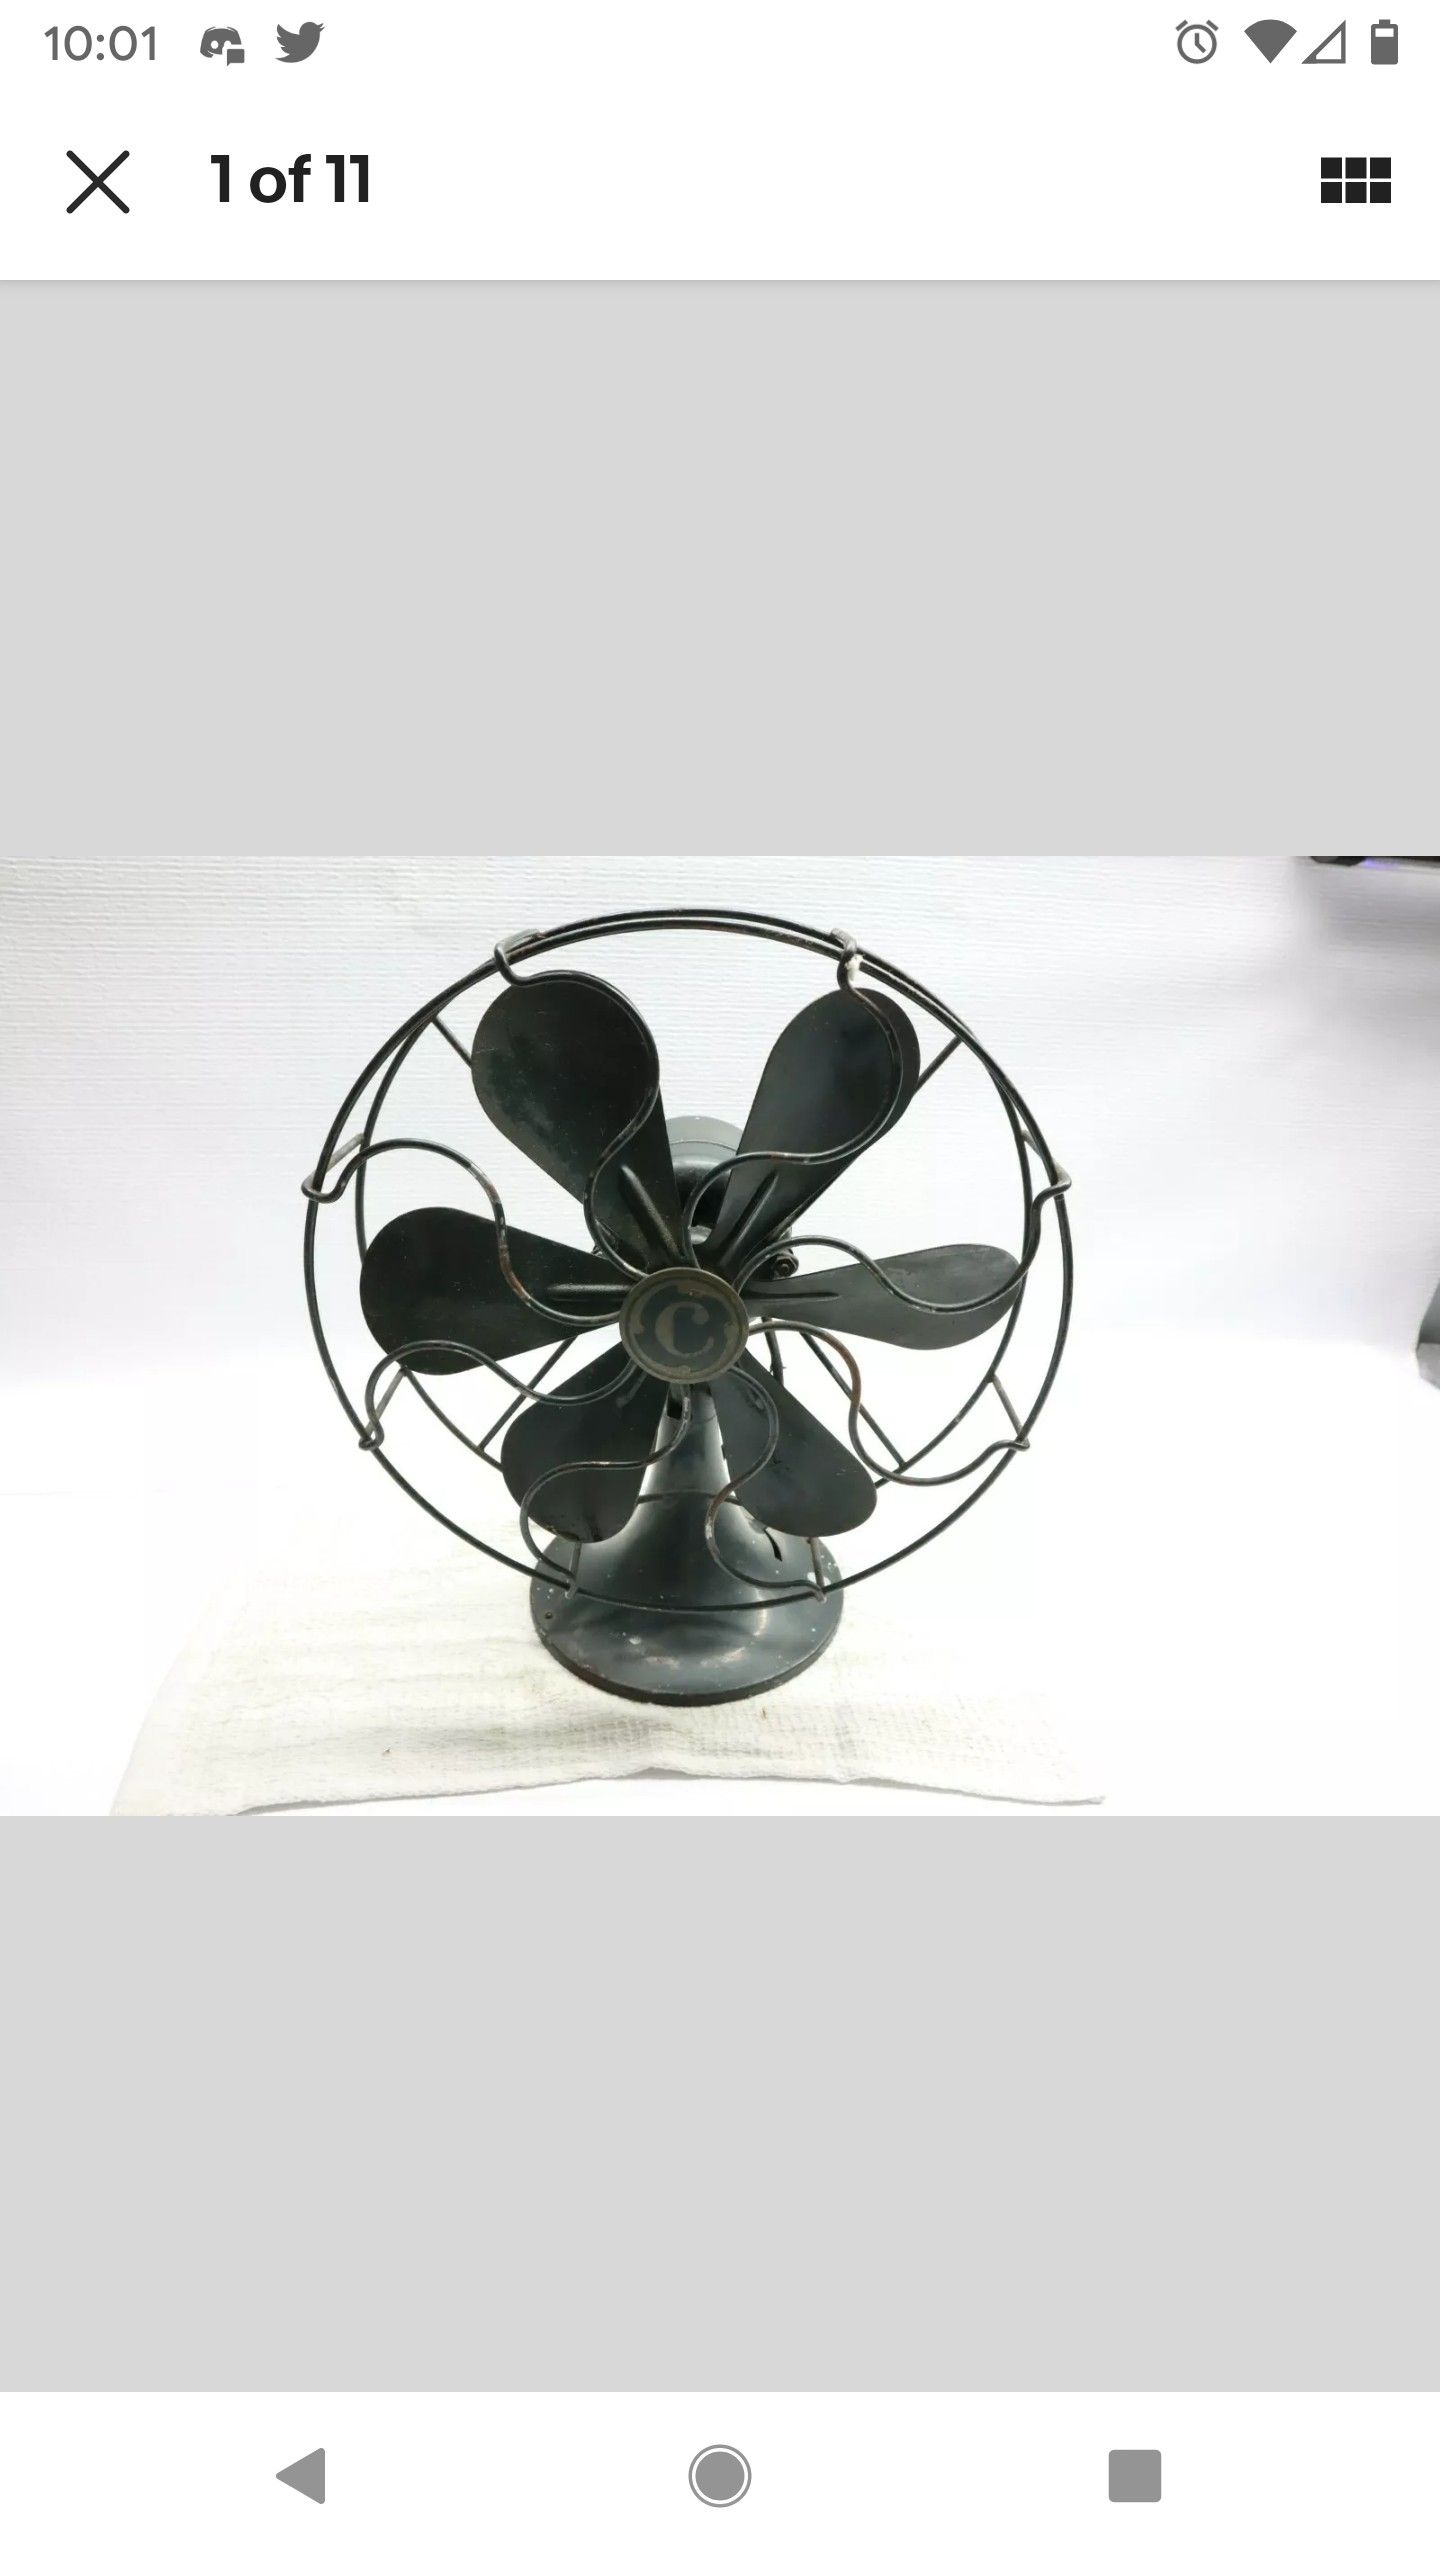 Used Antique Command Air 11" Electric Desk Fan - 6 Blades - 1 Speed - Working! U